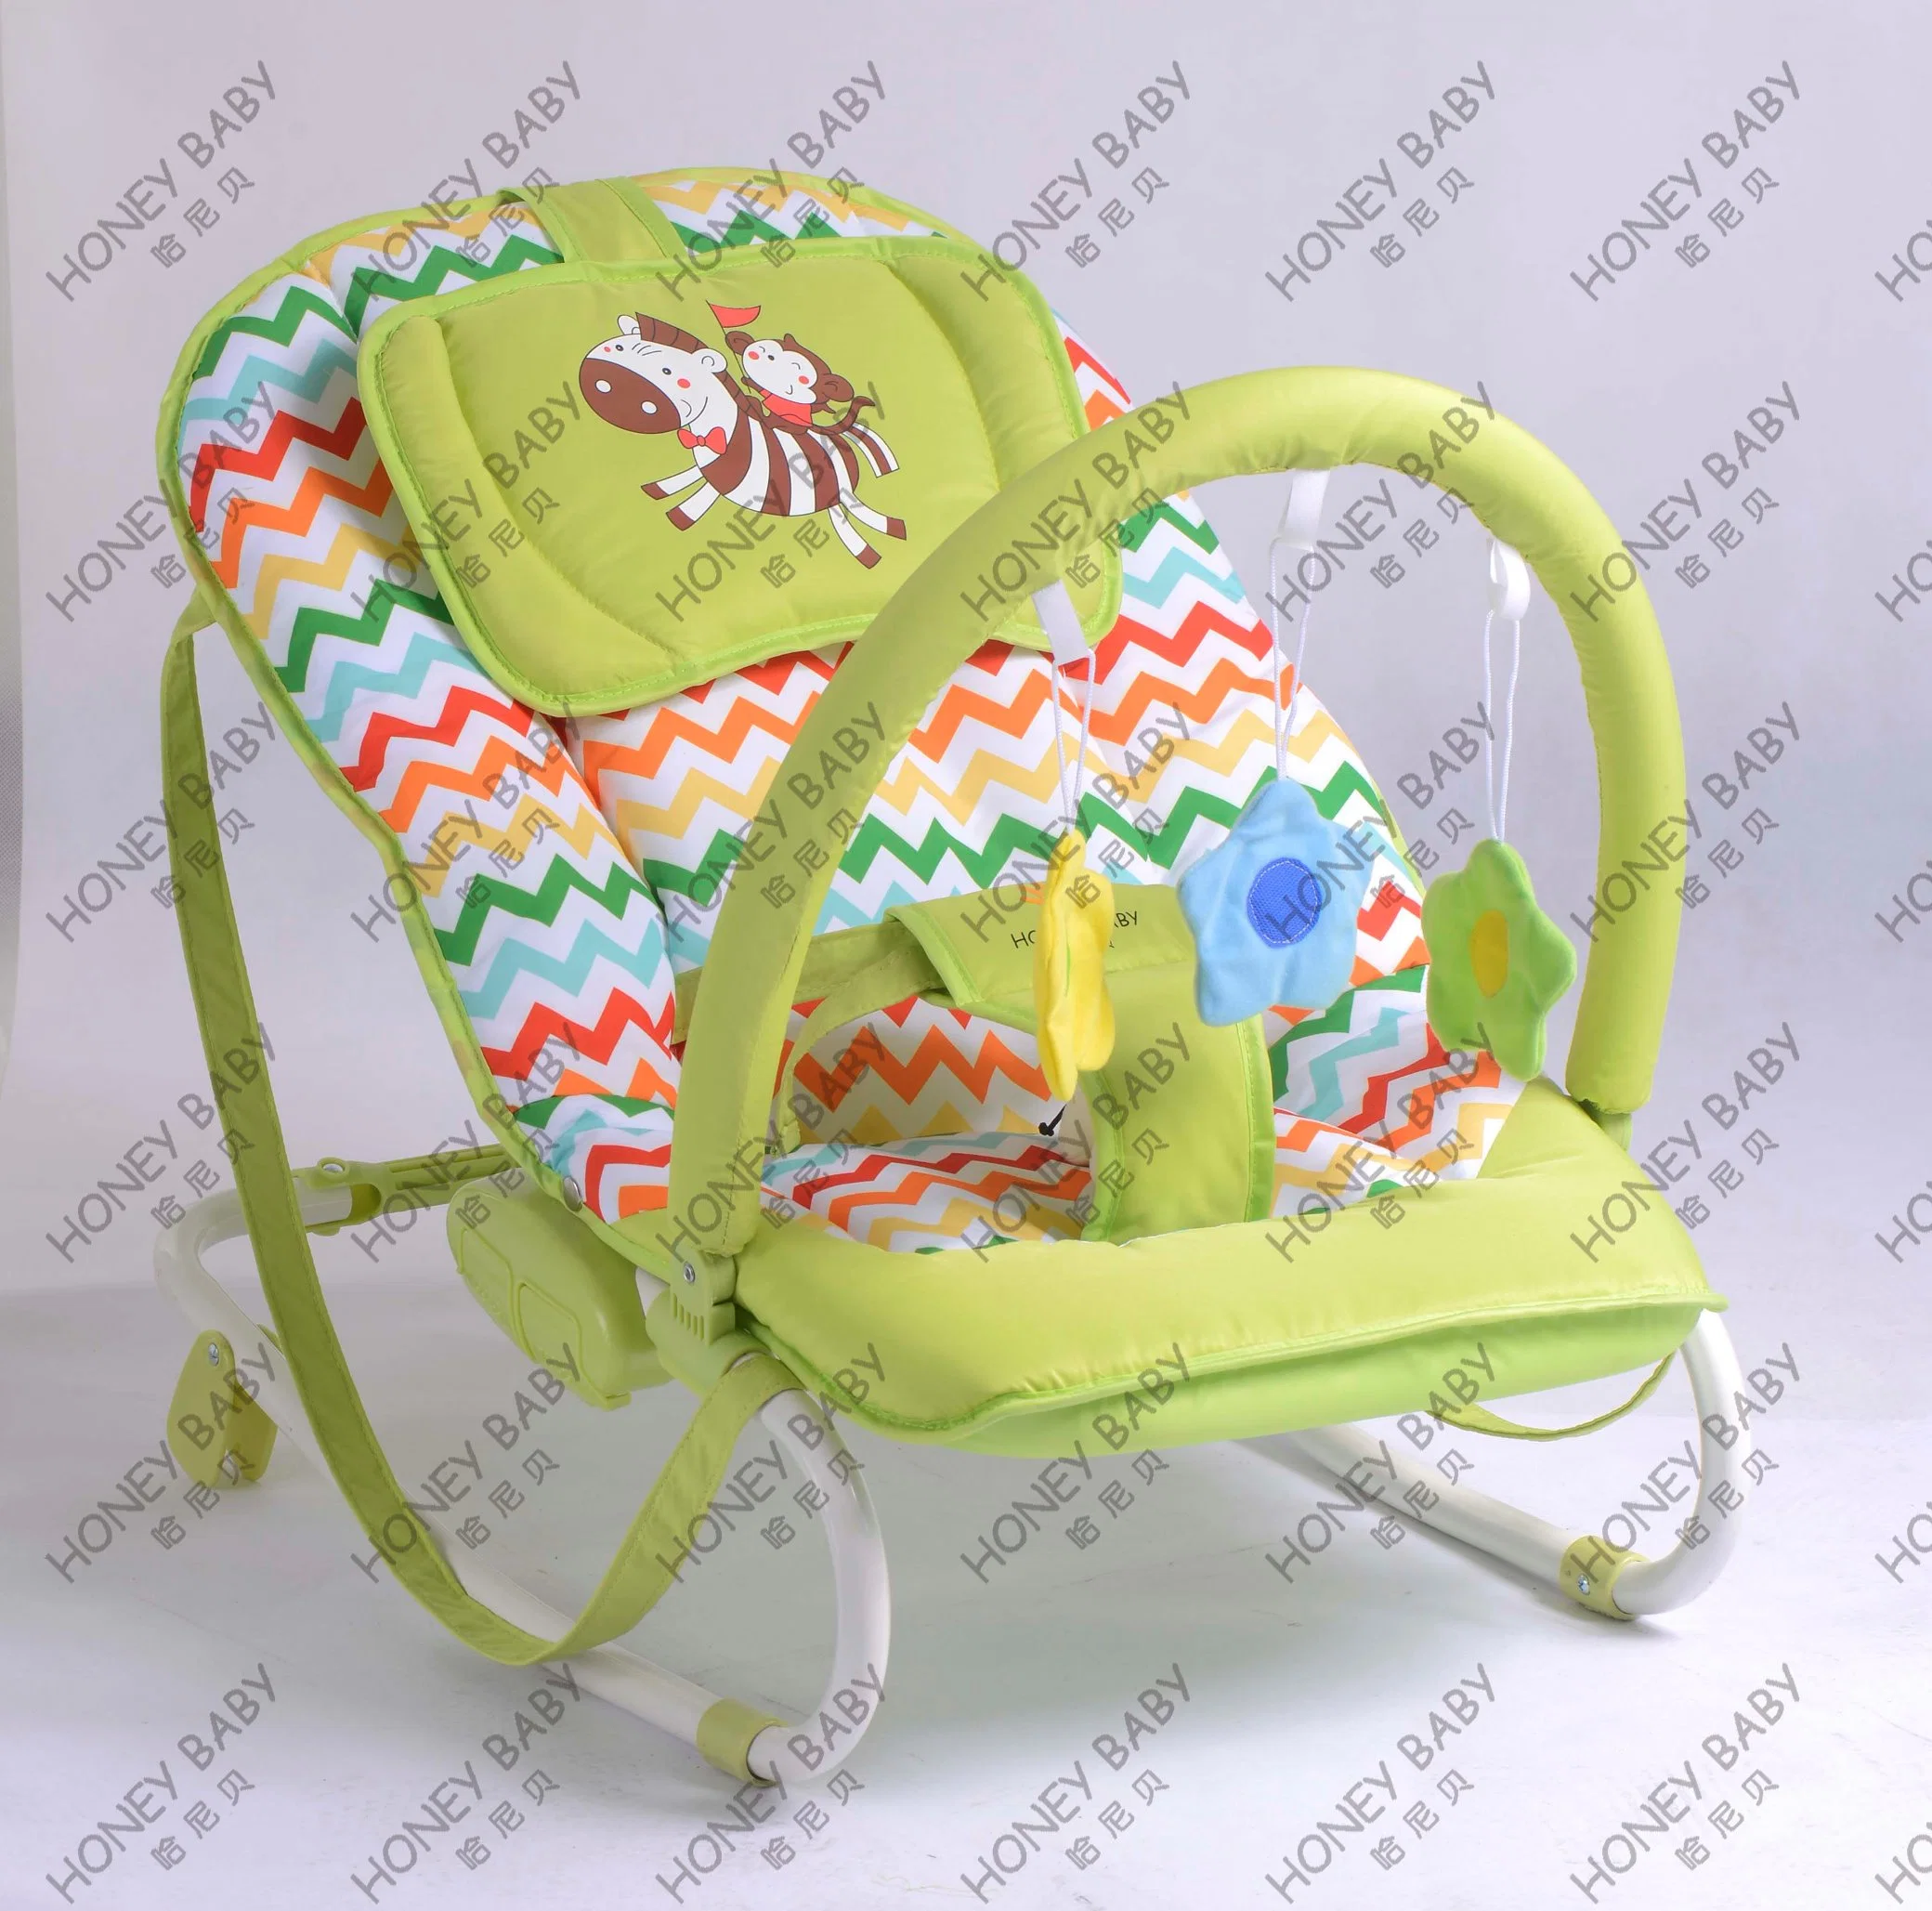 Wholesale/Supplier Bouncer Chair Manufacturer Cheap New Born Infant and Washable Seat Pad Kid Baby Swing Rockerproduct Namebaby Bouncersize60 (L) *44 (W) * 50 (H) Cm